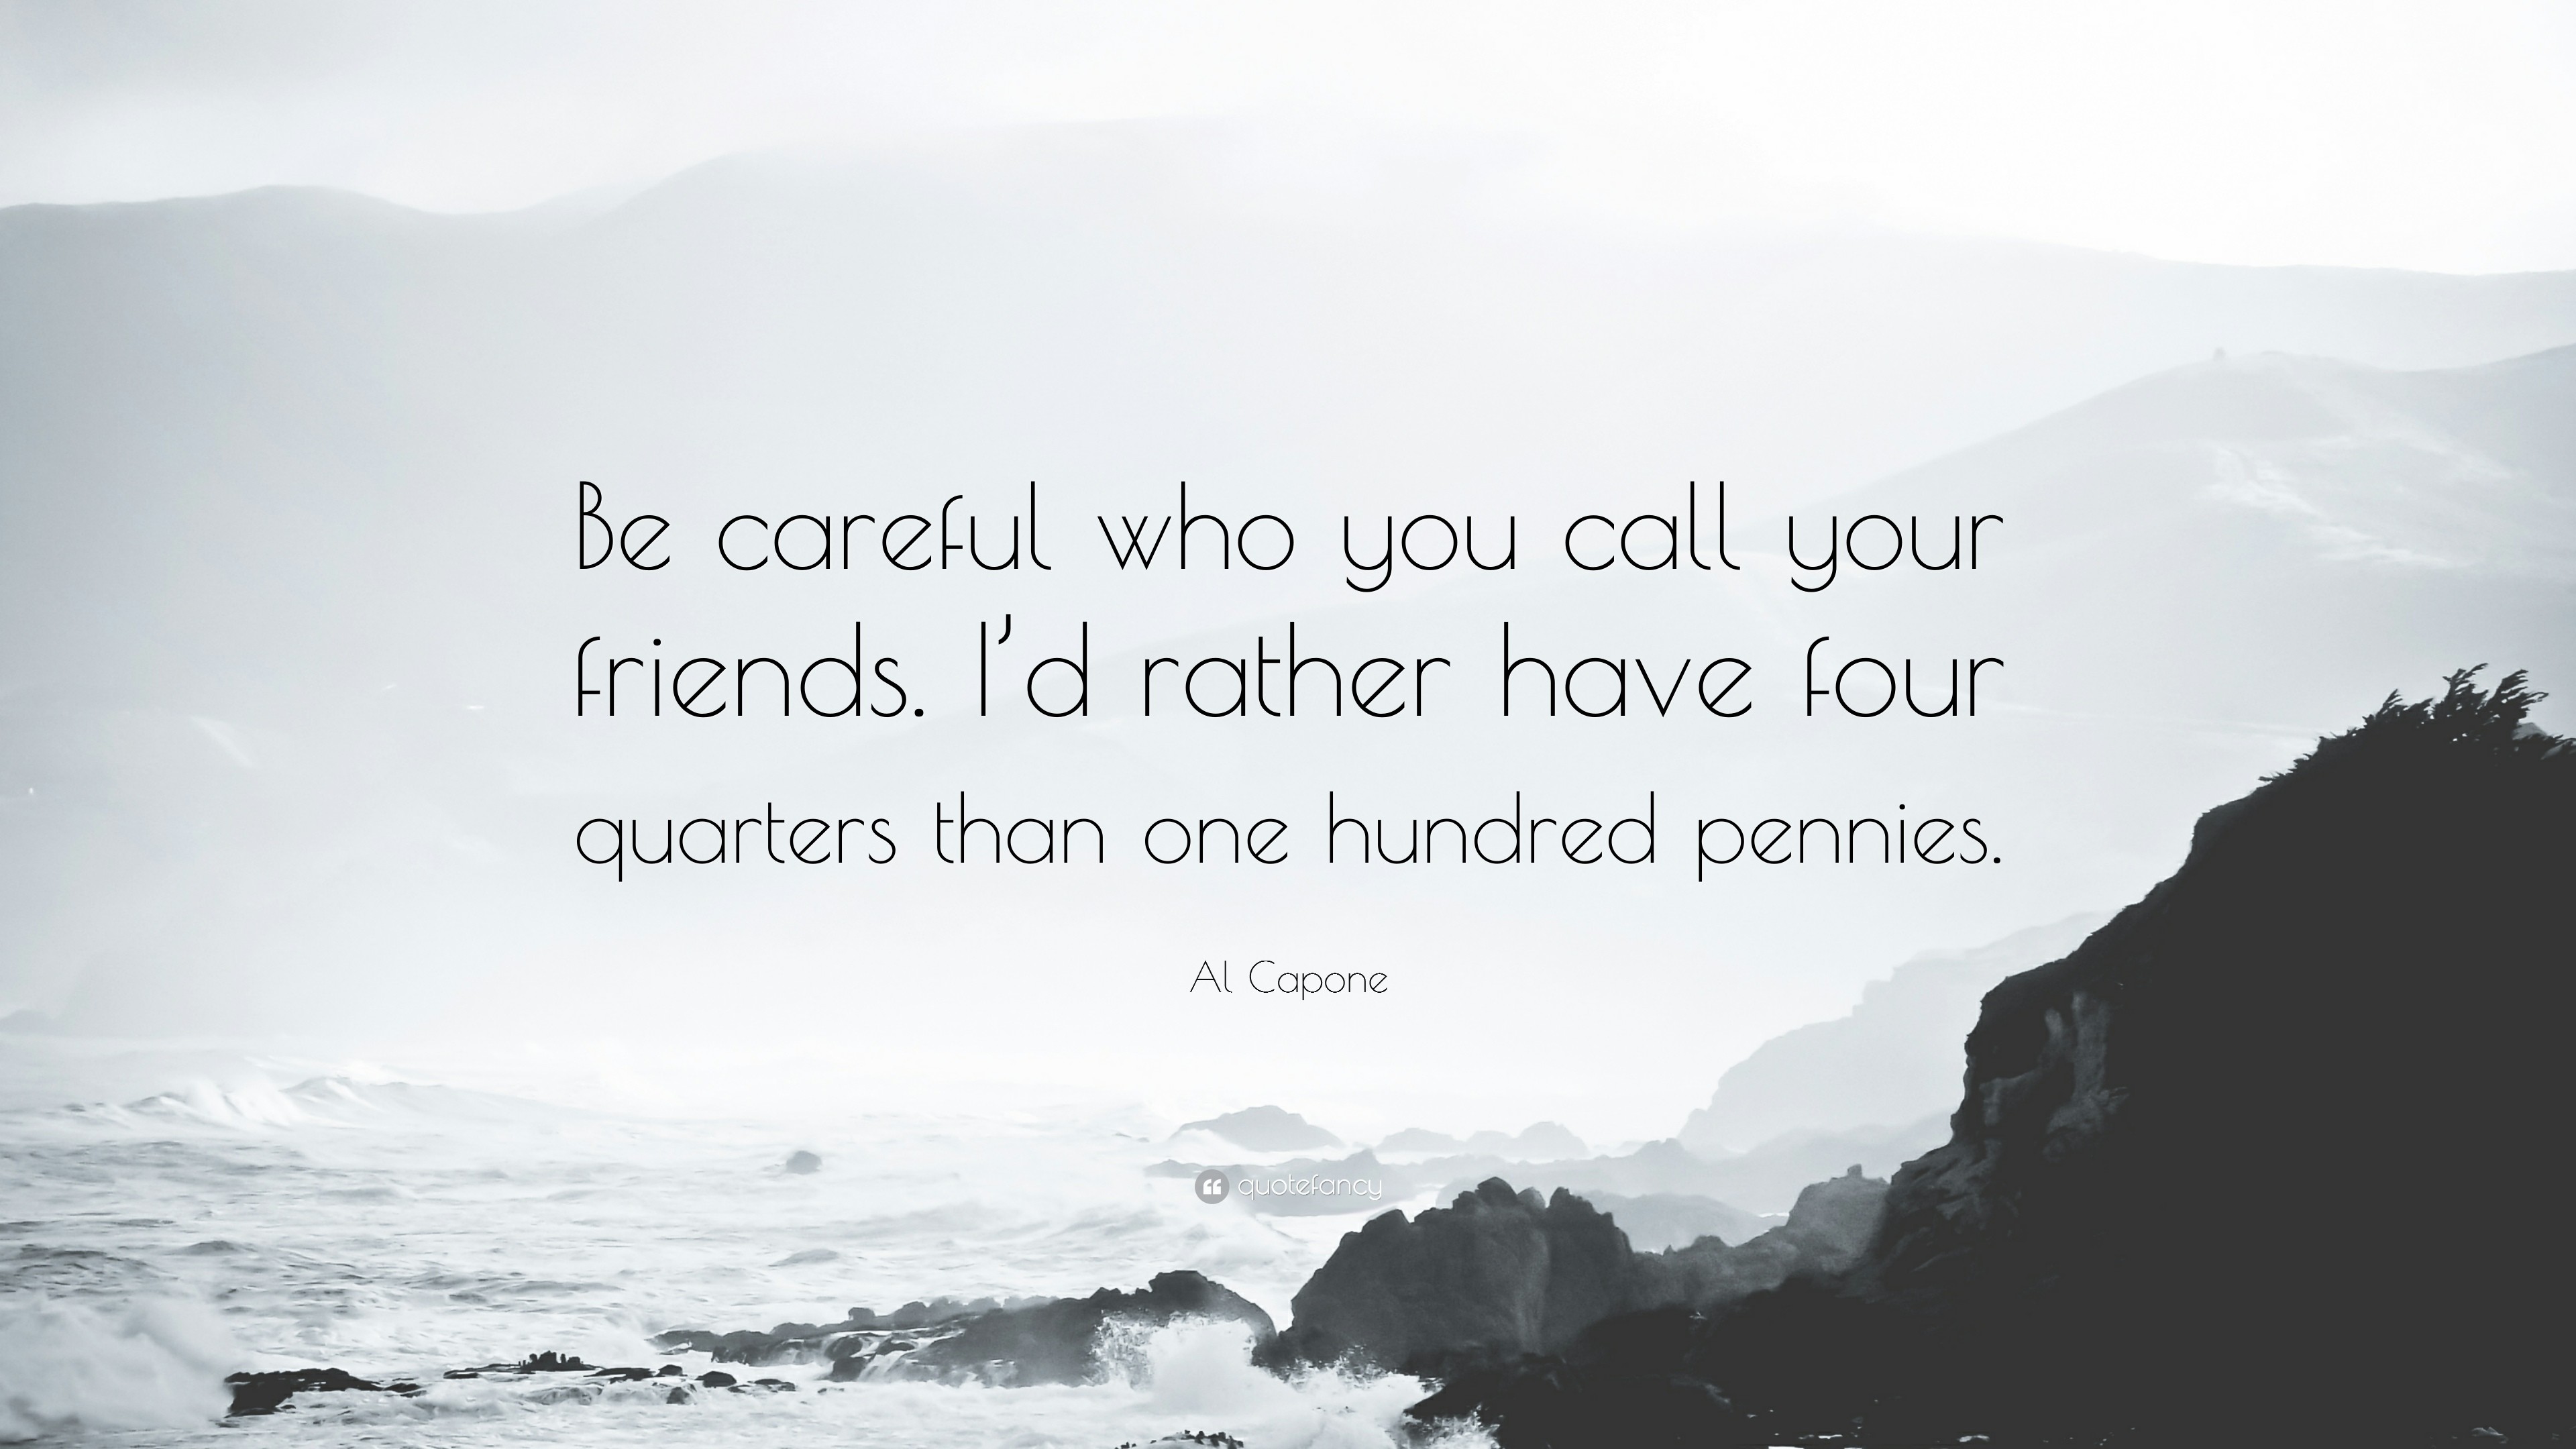 3840x2160 Al Capone Quote: “Be careful who you call your friends. I'd